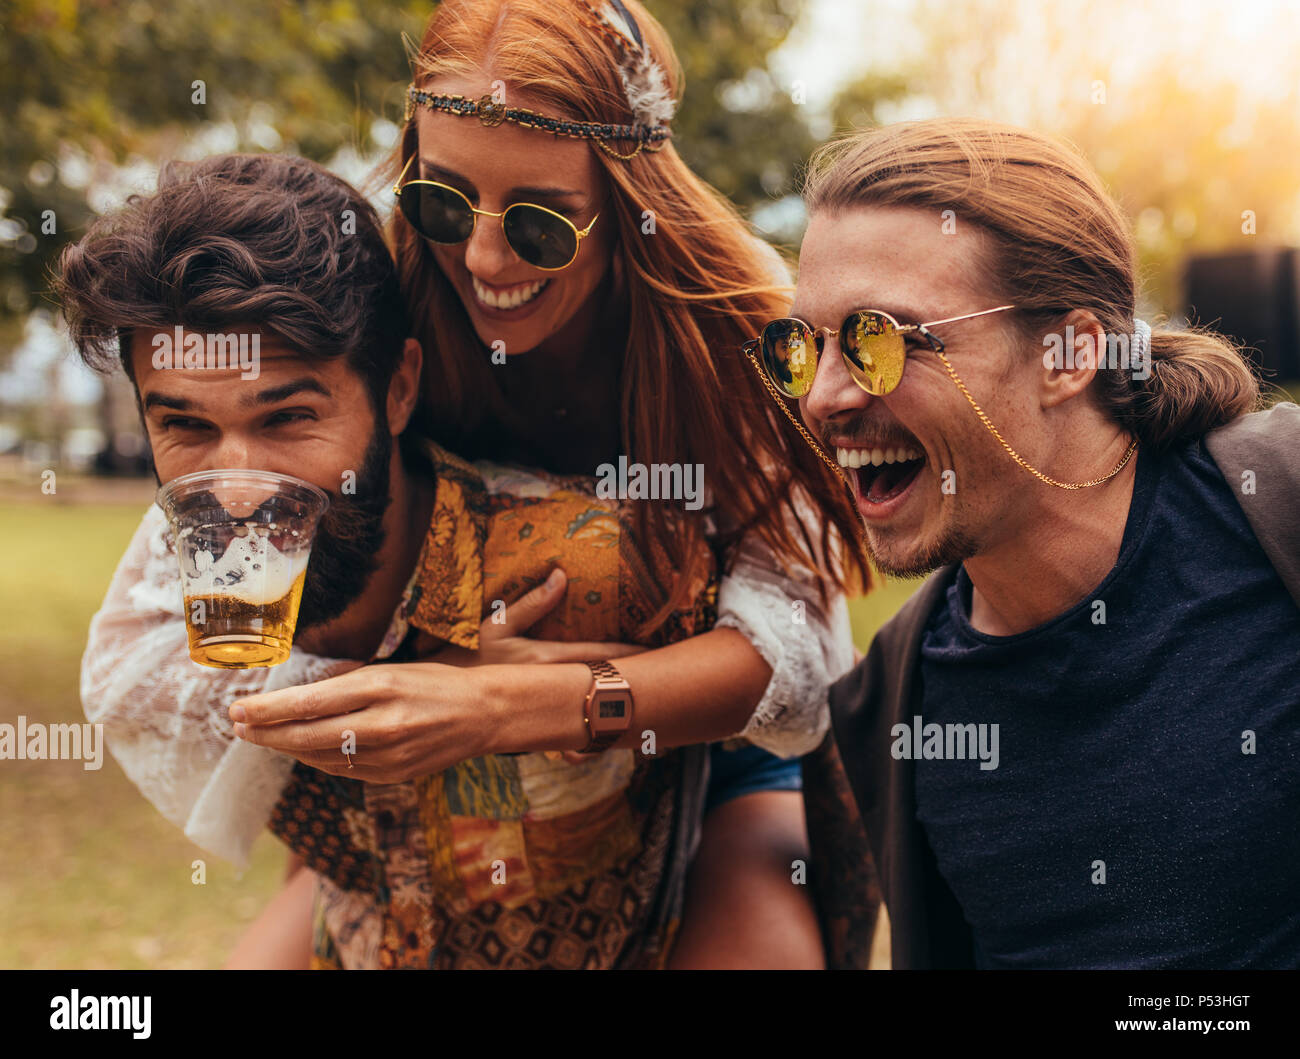 Cheerful young people having fun outdoors at park. Men and woman piggybacking and having beer. Stock Photo